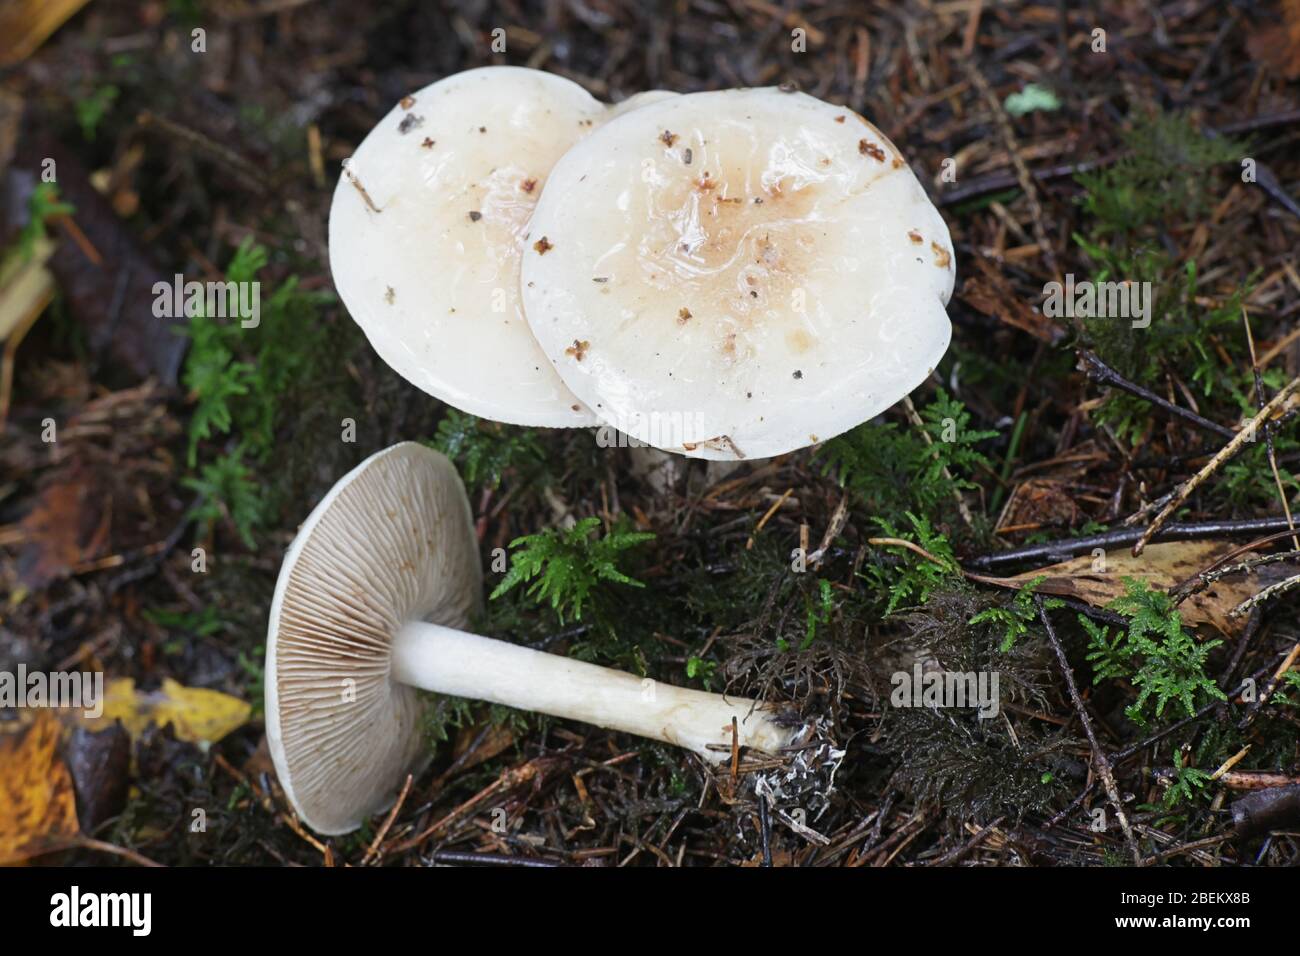 Hebeloma crustuliniforme, known as poison pie or poisonpie, poisonous mushrooms from Finland Stock Photo